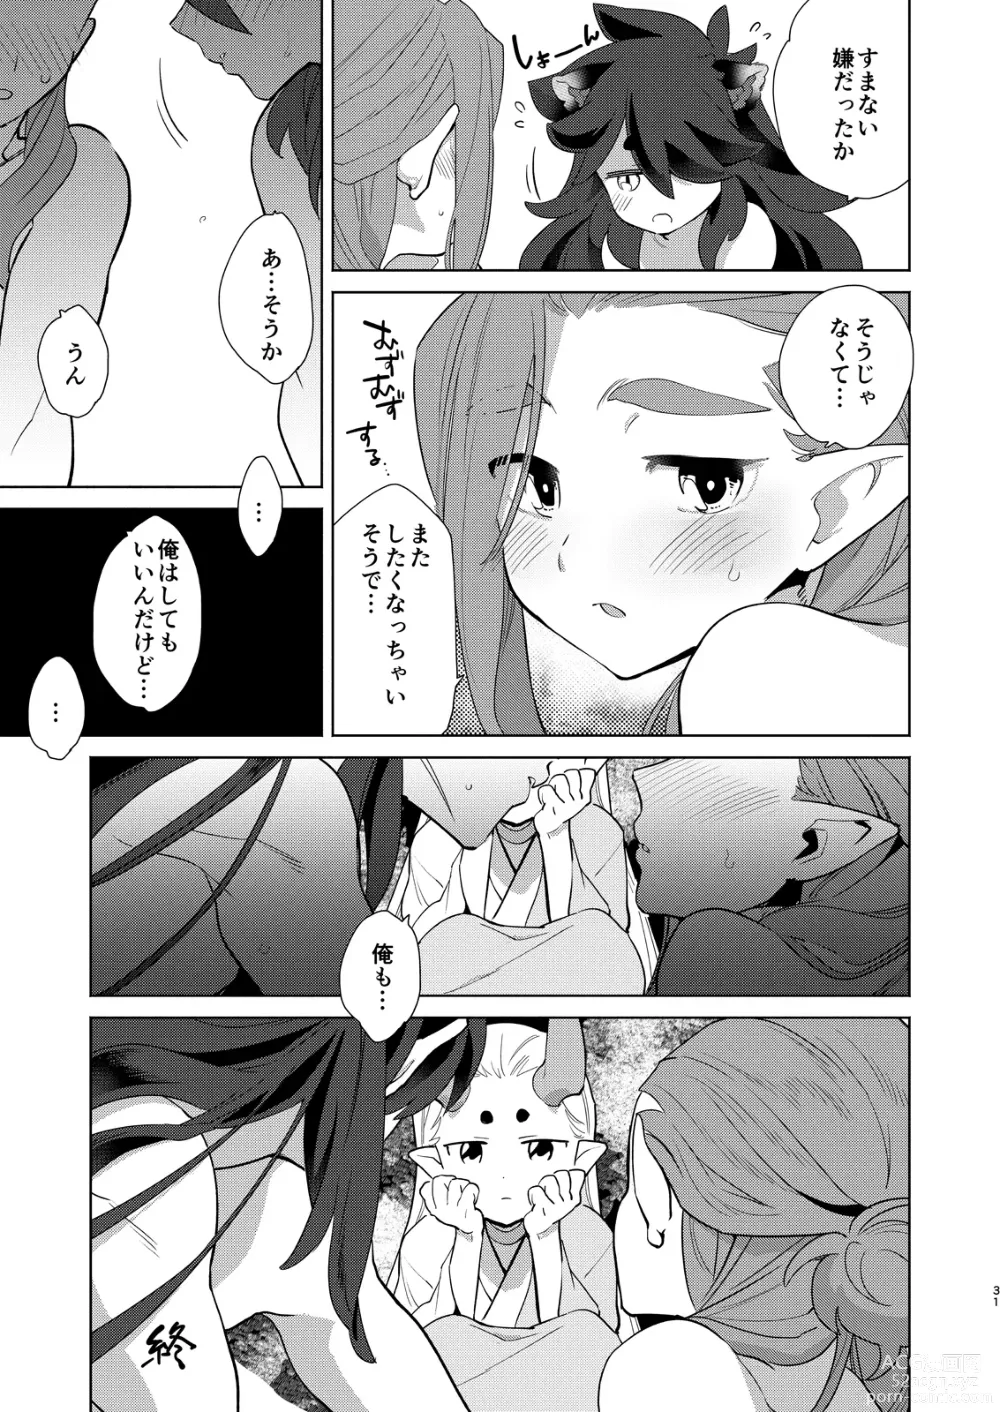 Page 31 of doujinshi Onii-san to Issho